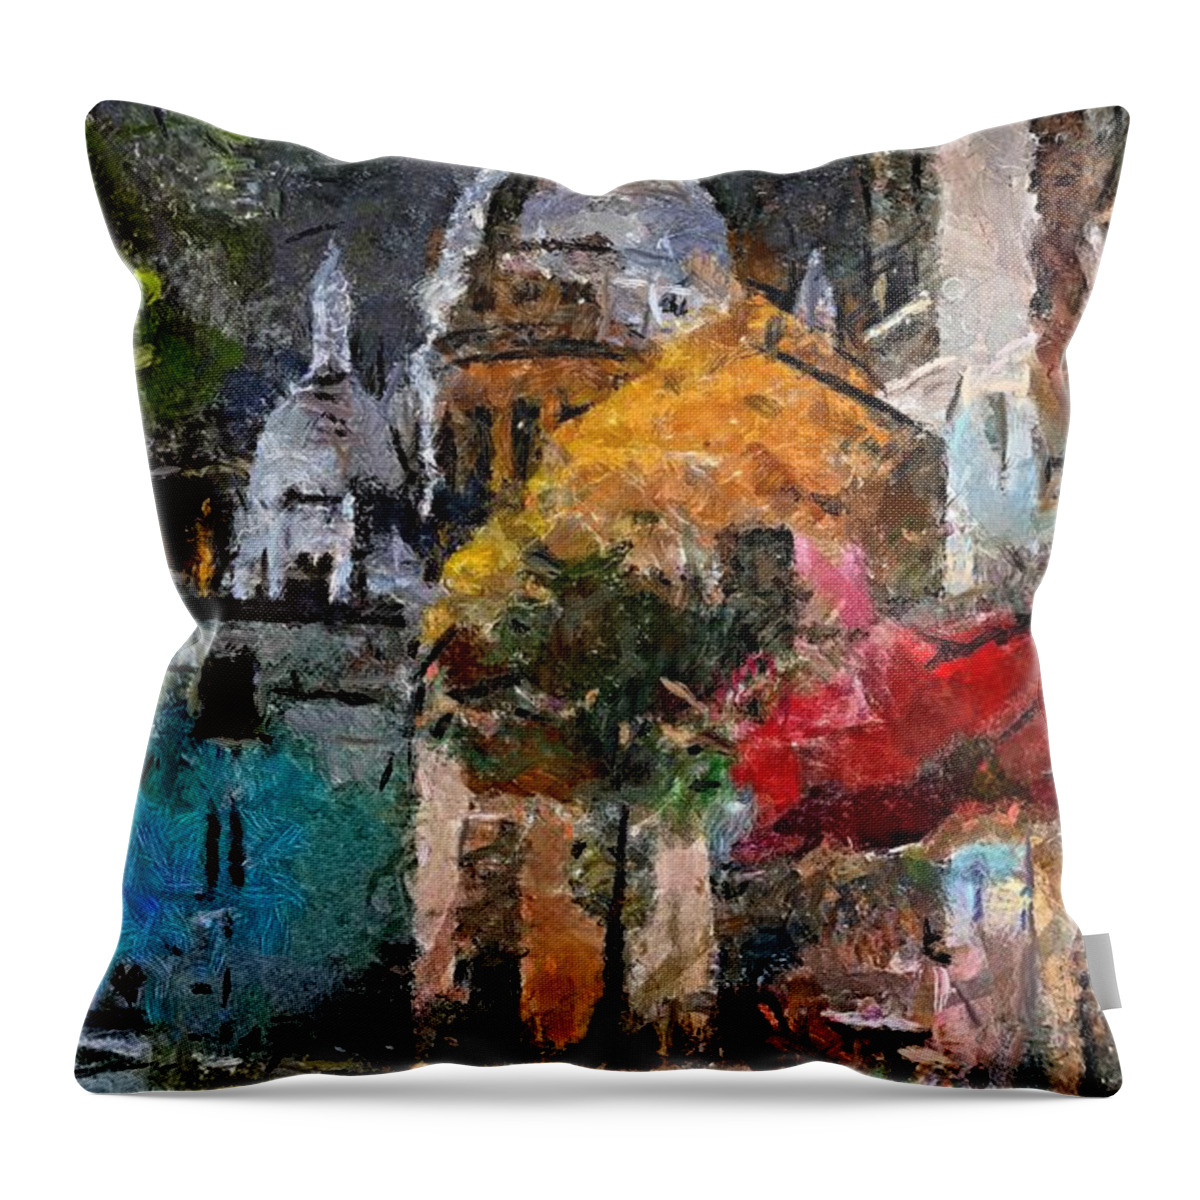 Cityscape Throw Pillow featuring the painting Rainy Evening In Montmartre by Dragica Micki Fortuna